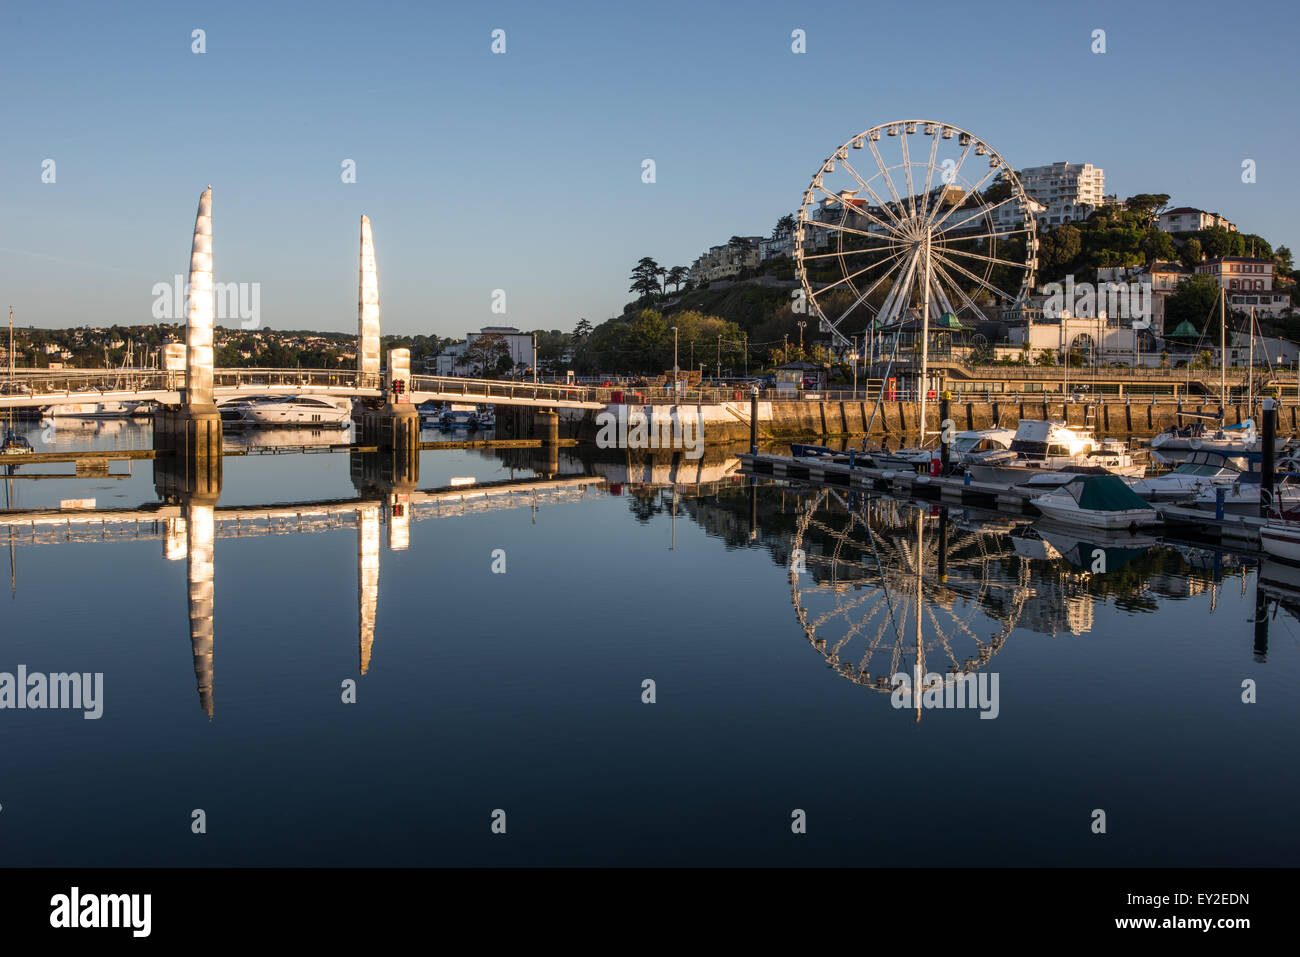 Torquay Harbour at Sunrise with boats a jetty a bridge and ferris wheel June 2015 Devon uk Stock Photo